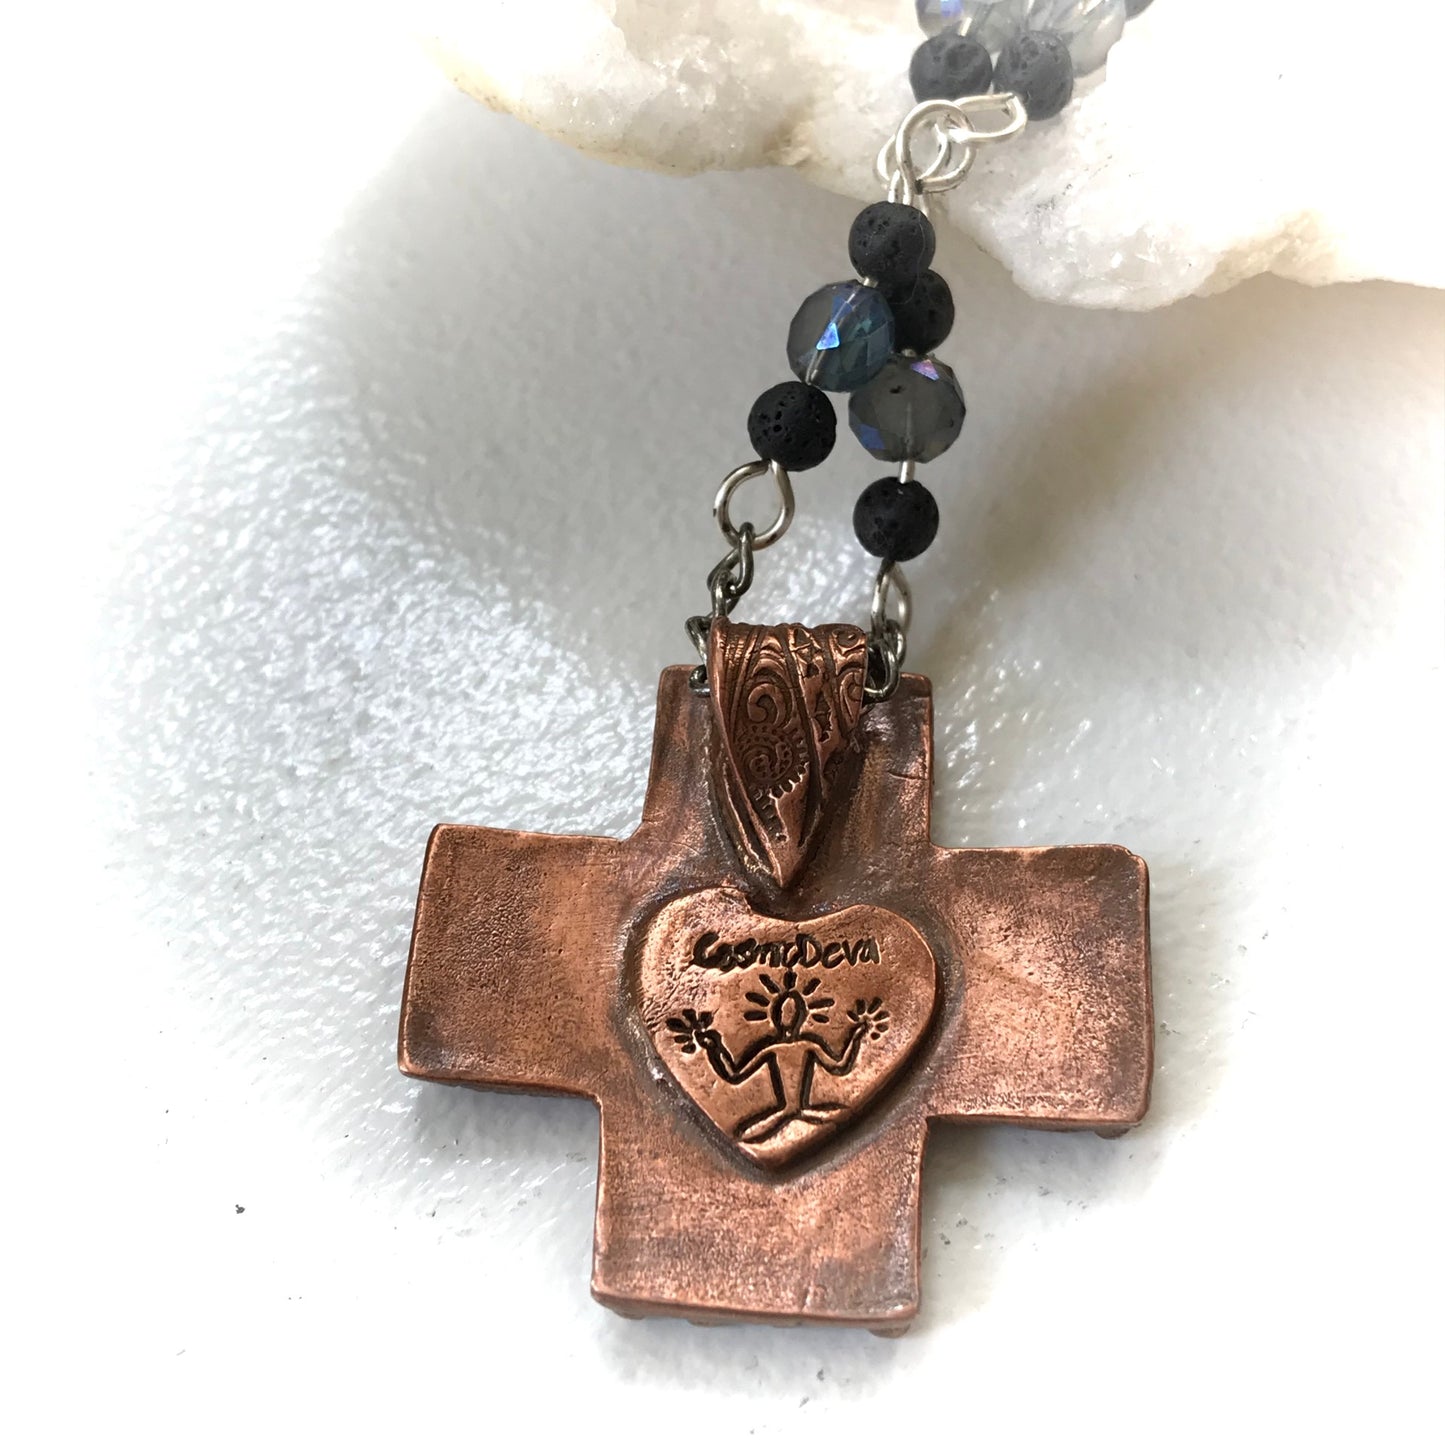 Copper Cross Rosary Necklace, Boho Faith Jewelry. A beautiful completely handmade and kiln fired western cross pendant made of solid pure copper dangles from a rosary necklace with gorgeous petite blue Czech beads and black lava beads. The handmade rosary chain is made of .925 sterling silver plated wire with sparkling blue faceted Czech glass beads and small black volcanic lava stone beads. A pretty little heart is stamped with the artist’s logo on the backside adding a lovely detail. - CosmicDeva